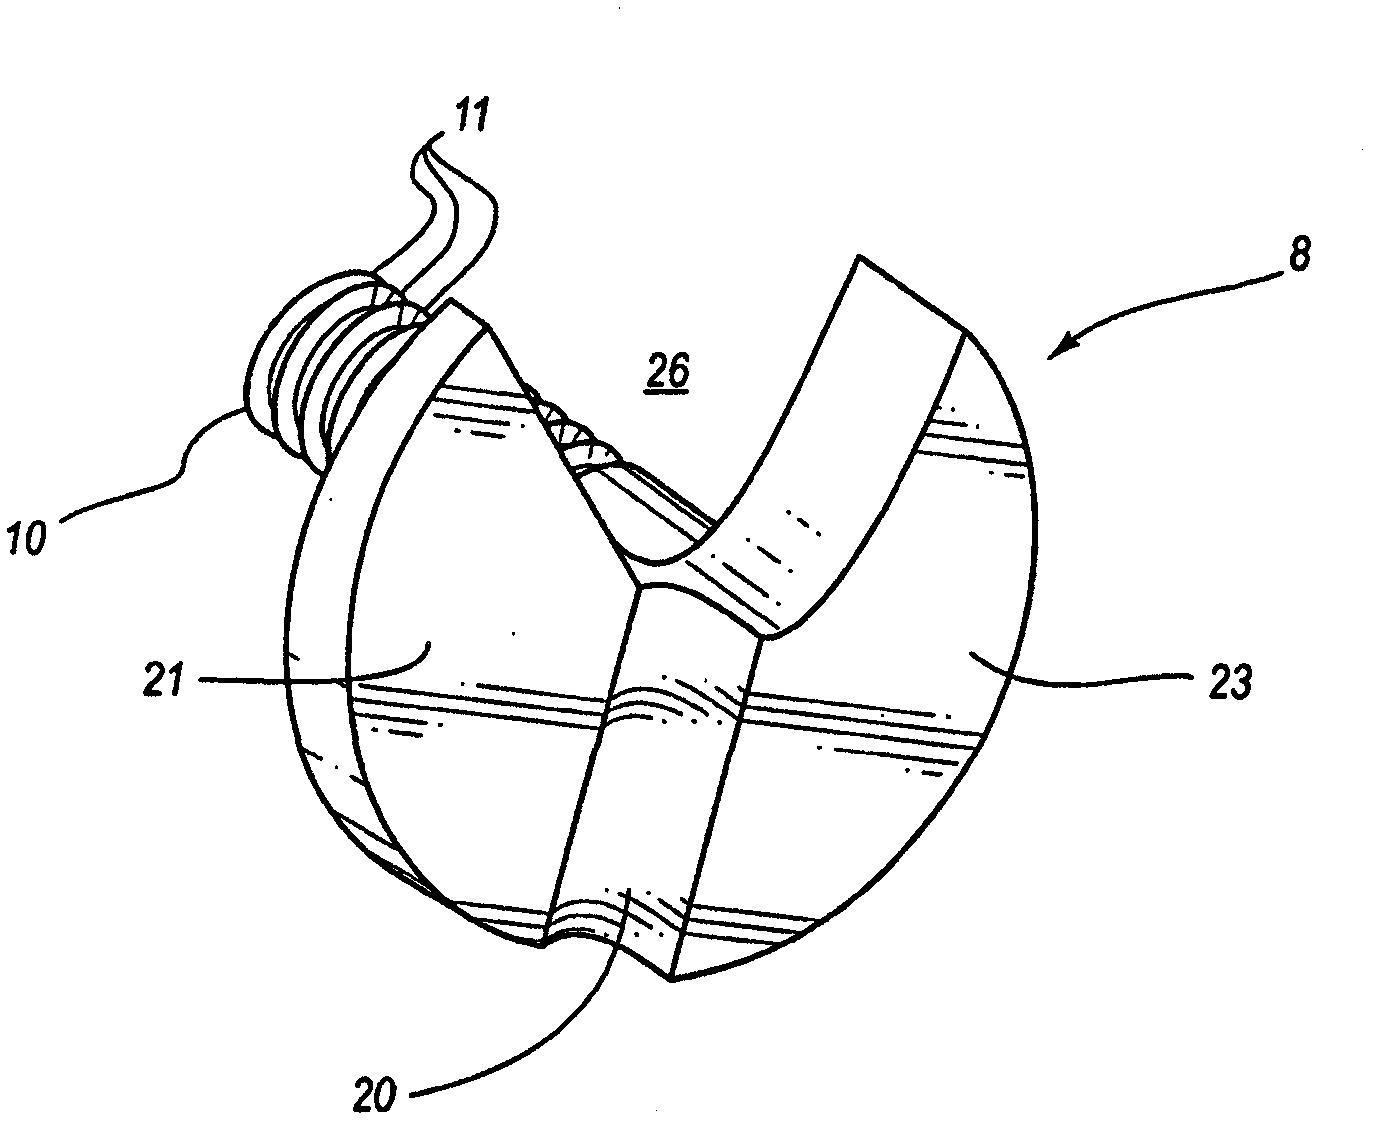 Radial artery compression device